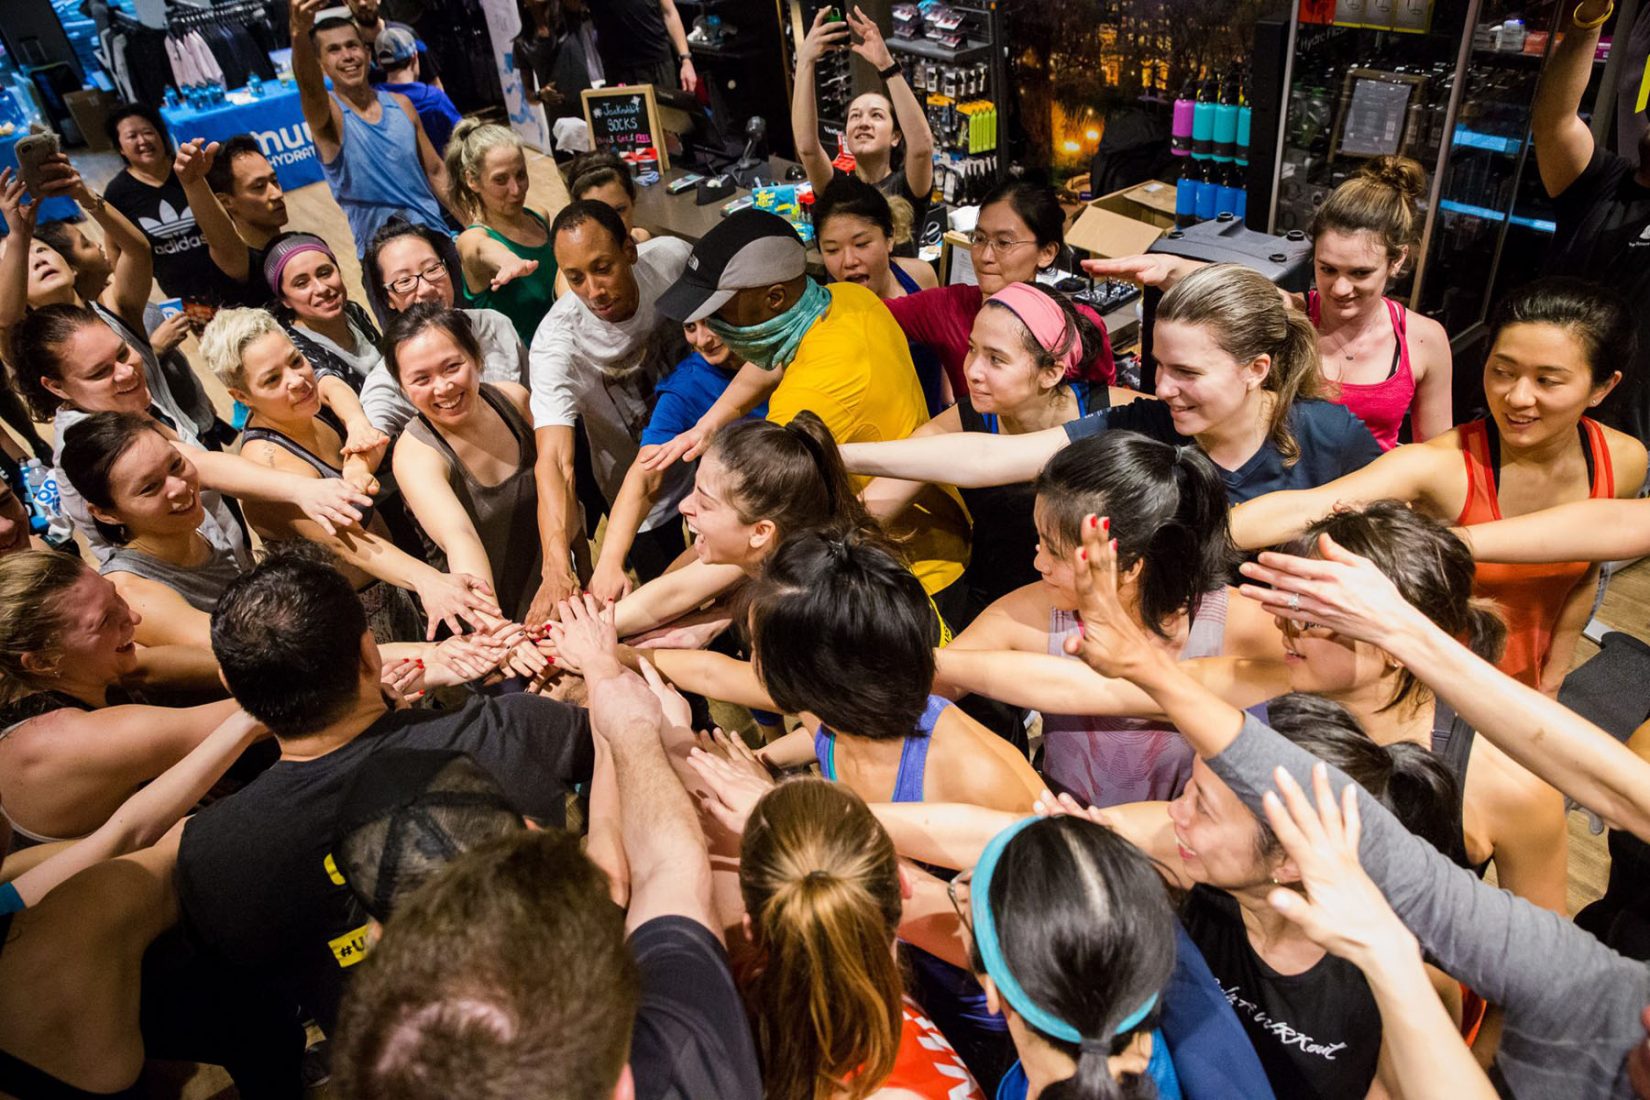 Union Square Sweat Fest is Back for 2019!